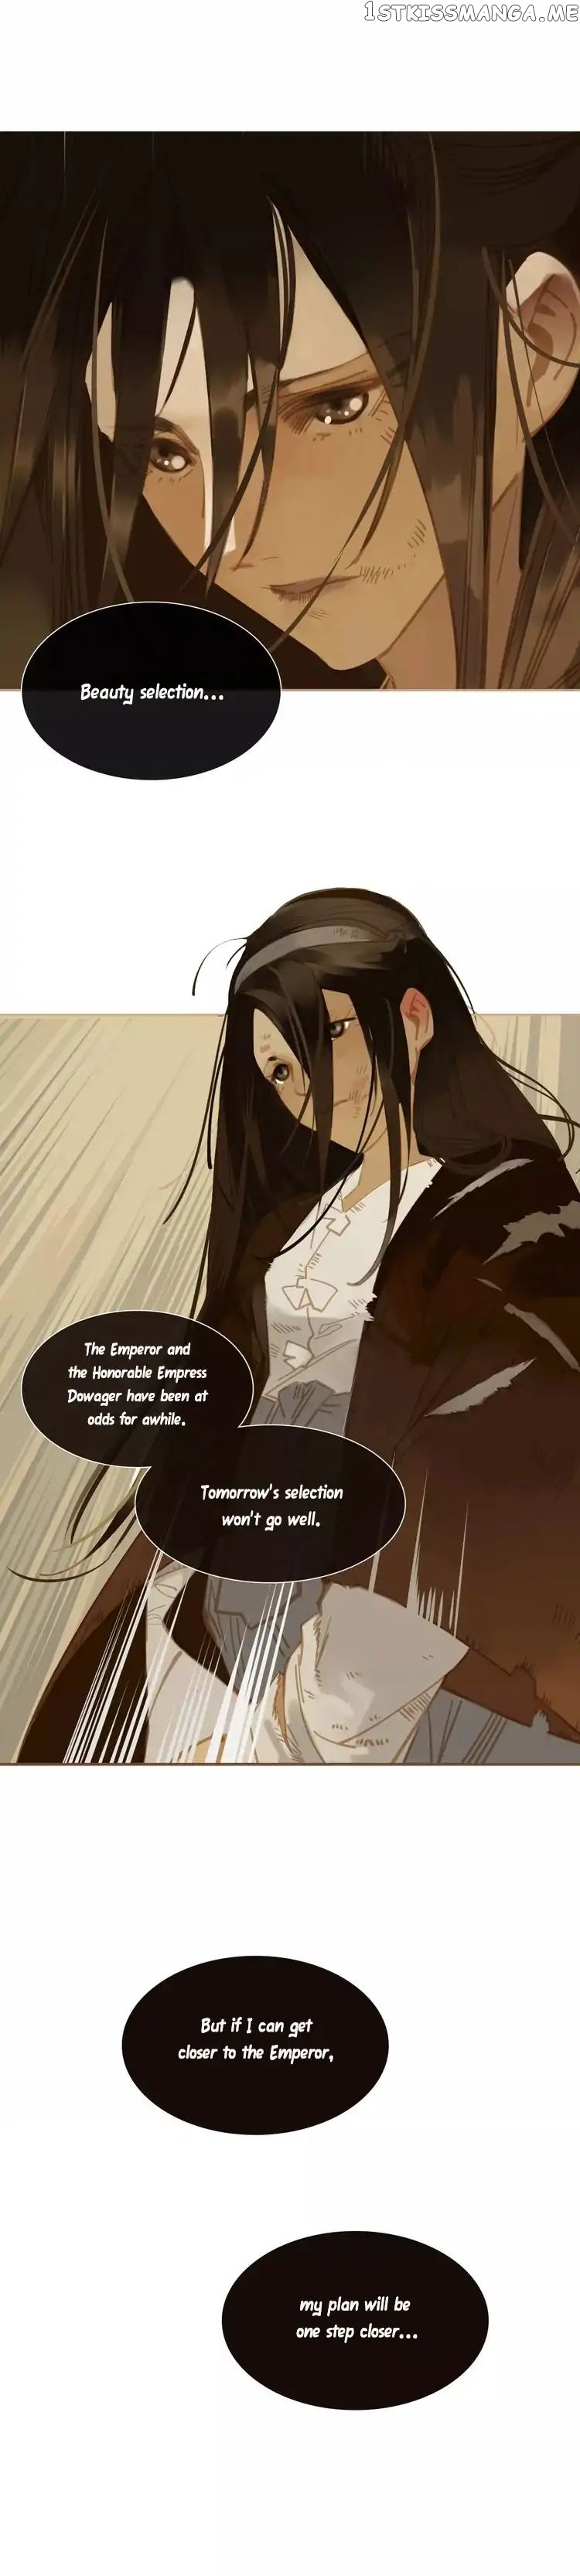 Generation’s Queen Ling chapter 1 - page 10